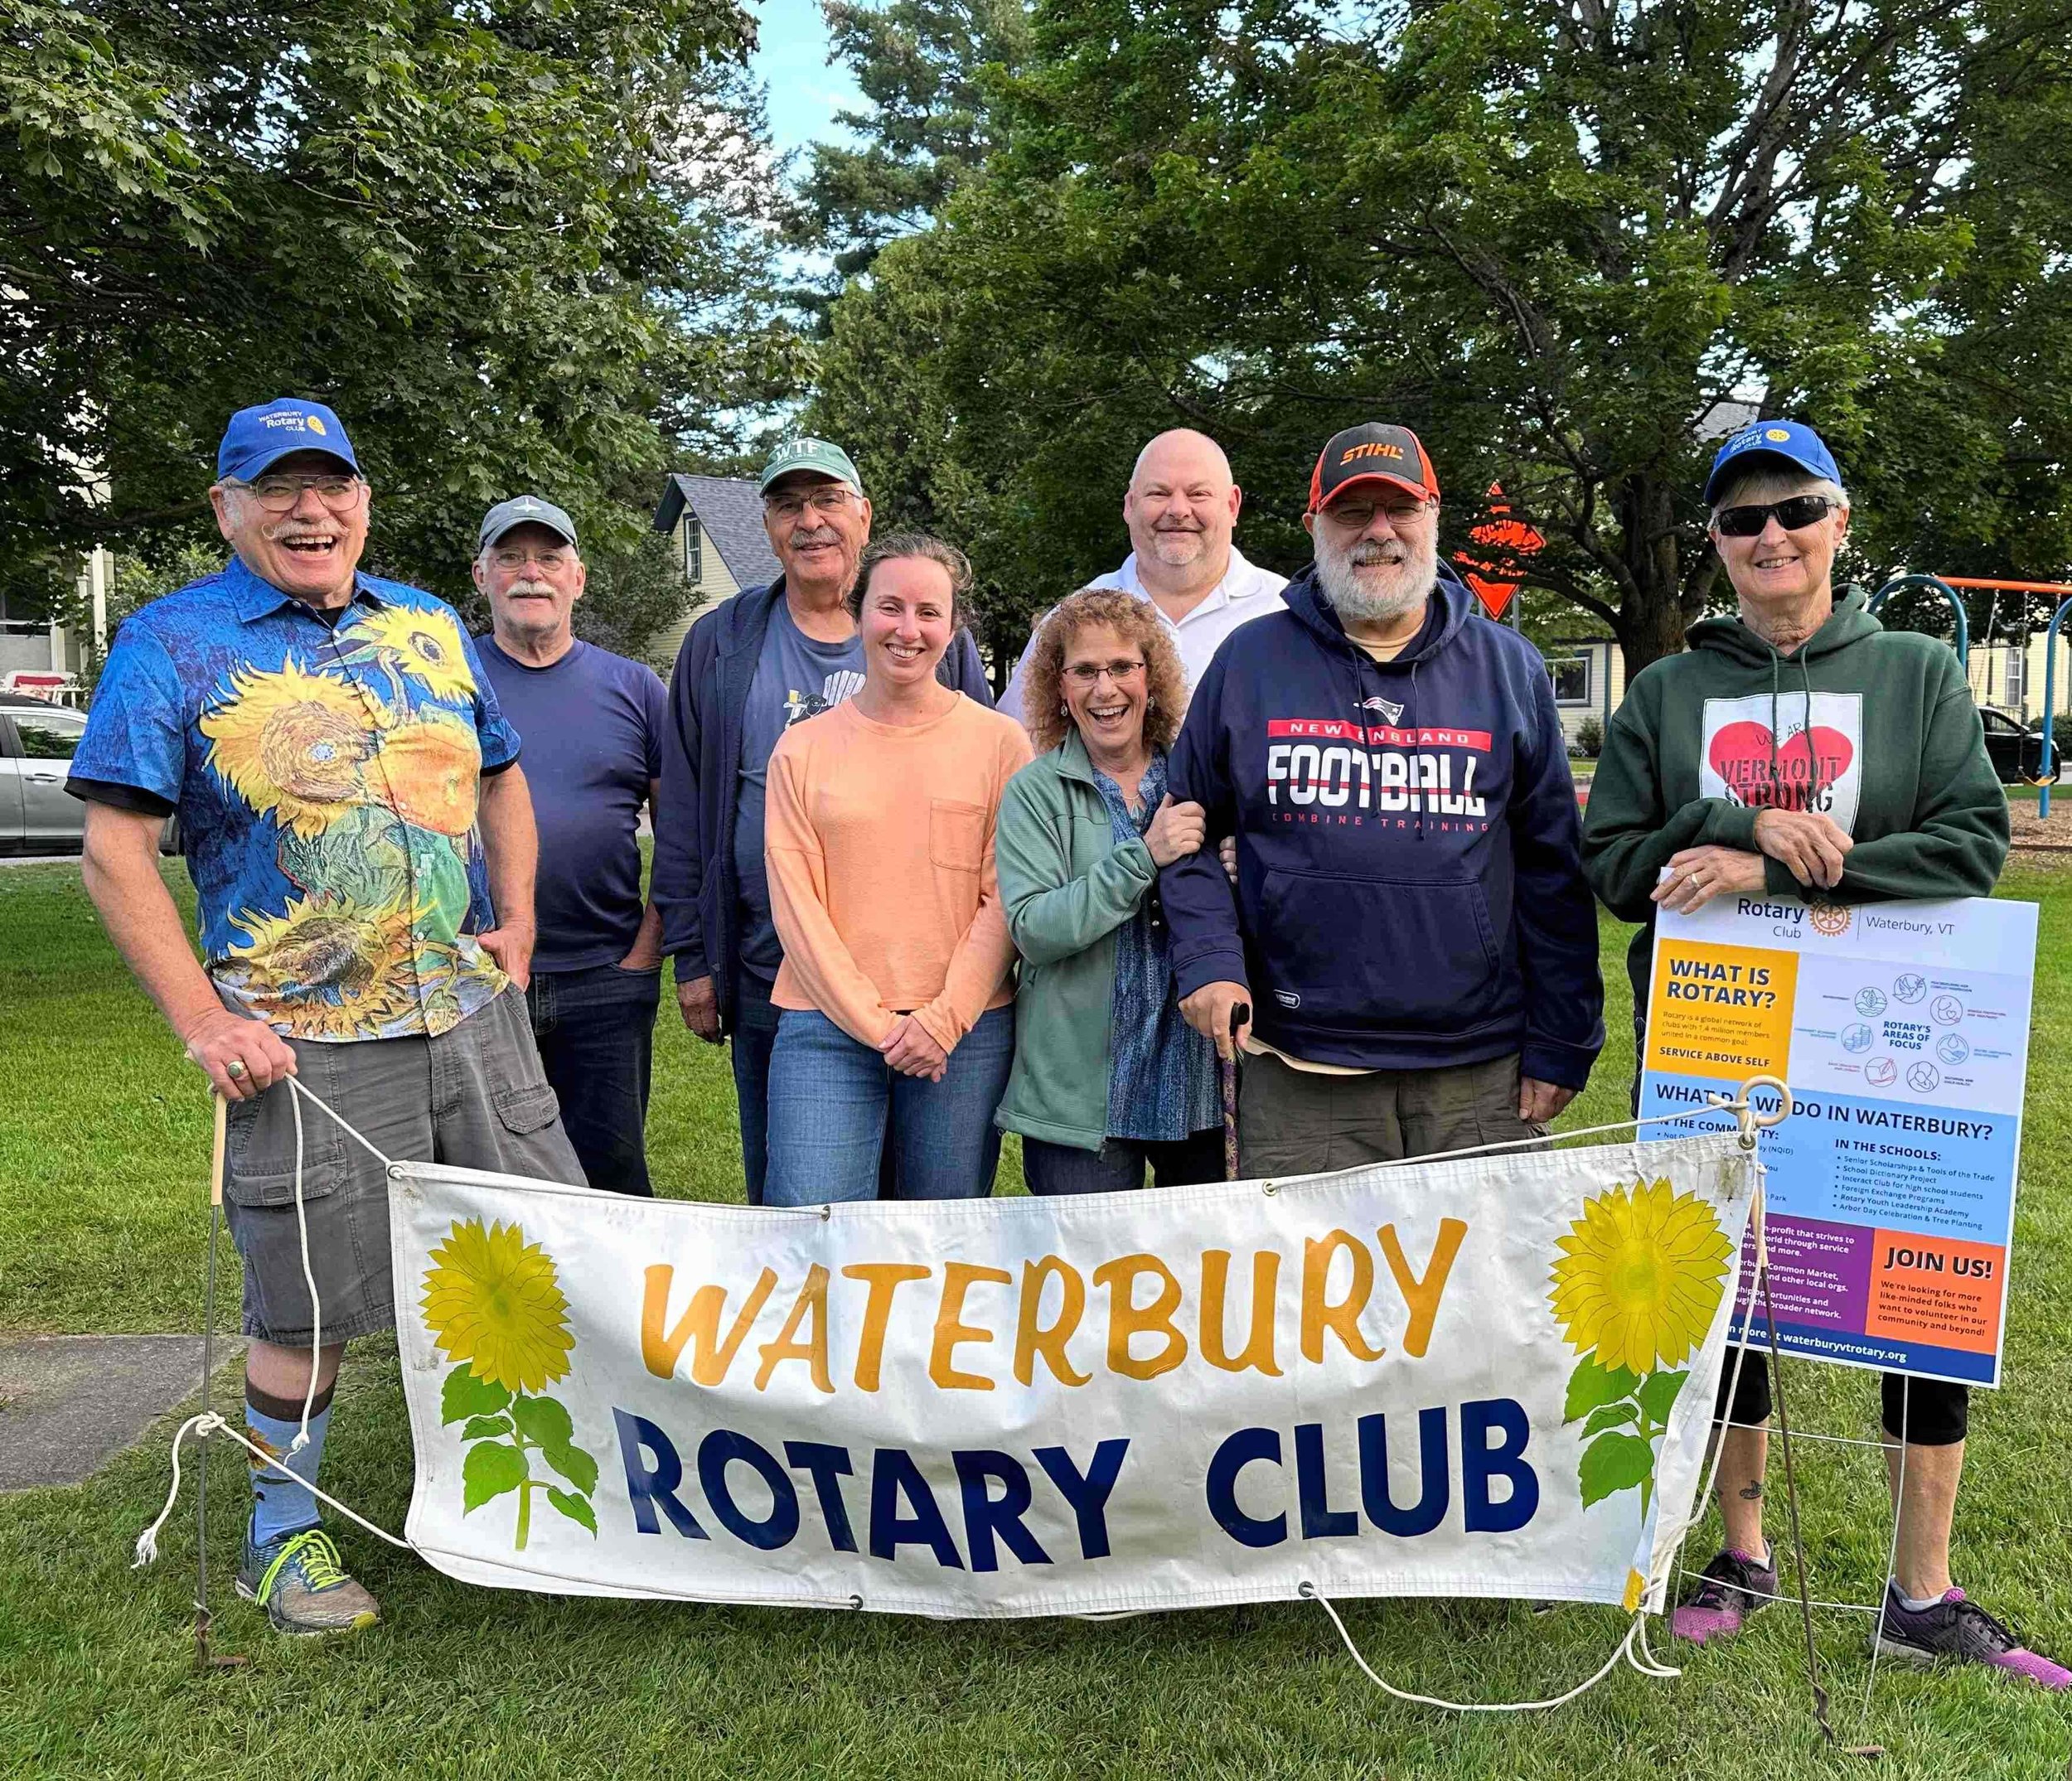  Rotary contest organizers and judges (left to right) John Malter, Al Lewis, Ron Guylas, Tori Taravella, Deb and Mike Bard, Justin Blackman (back row), Phyllis Arsenault-Berry. Photo by Lisa Scagliotti 